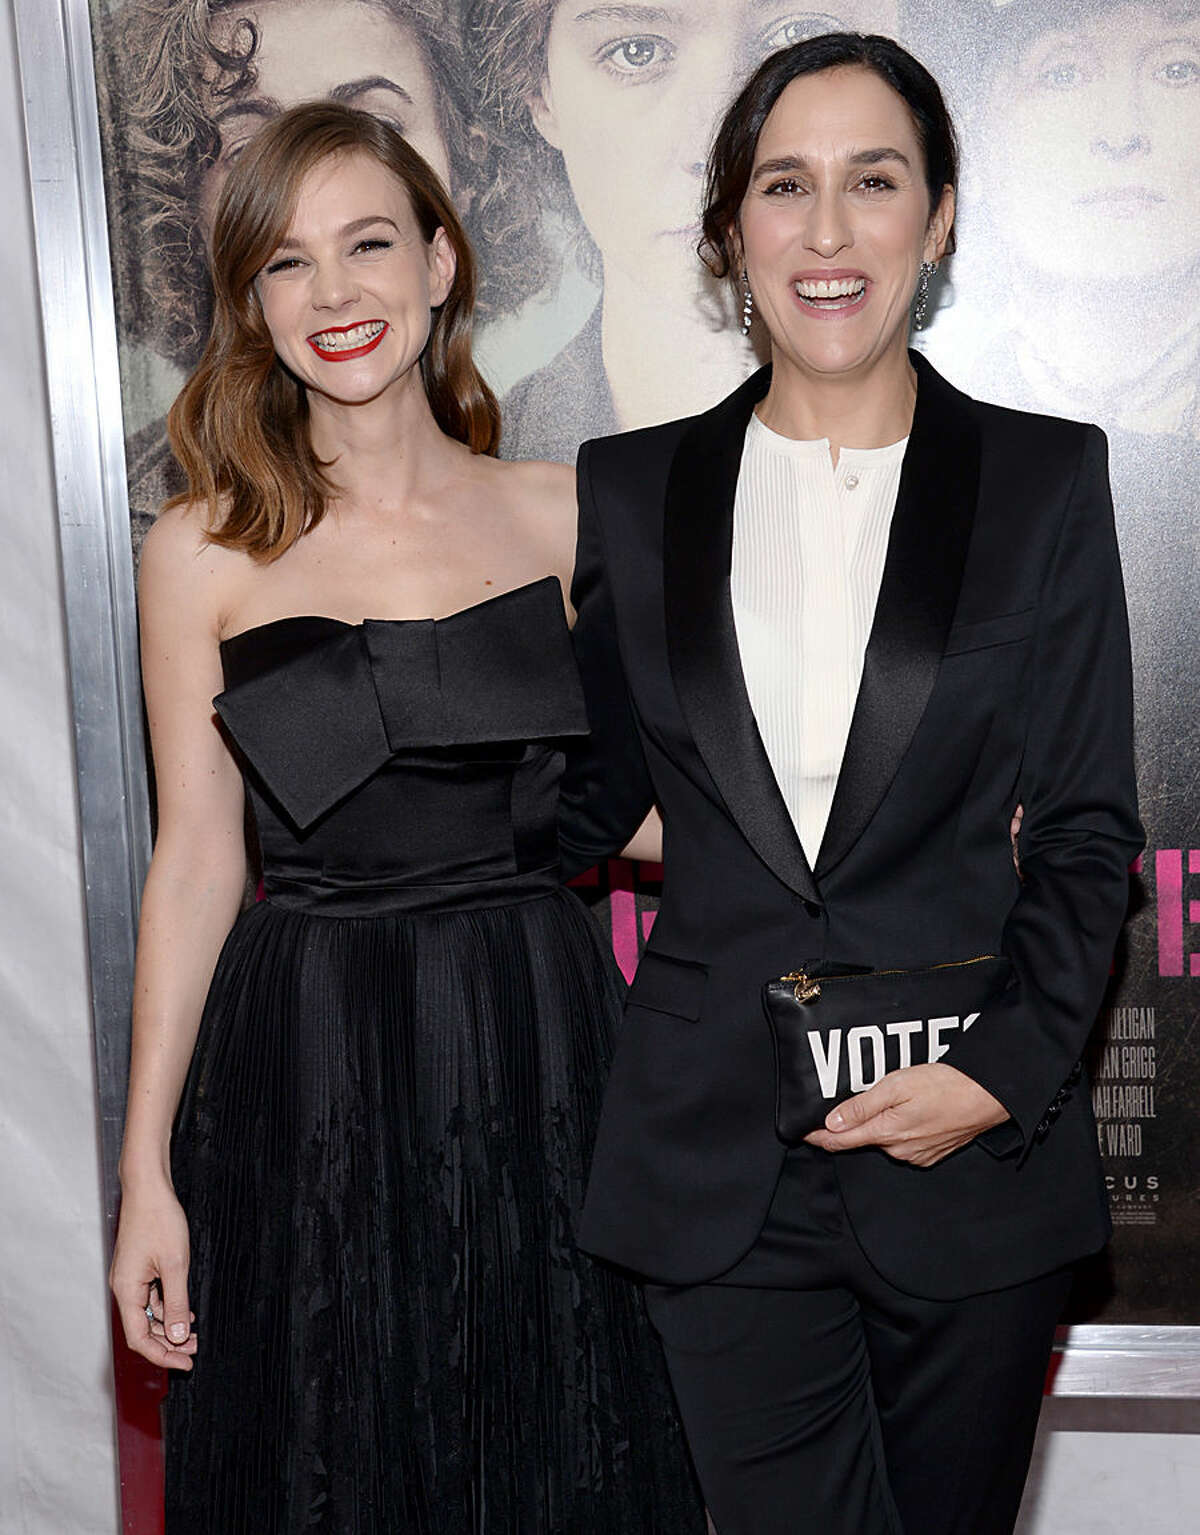 Carey Mulligan, left, and director Sarah Gavron attend the premiere for "Suffragette" at the Paris Theatre on Monday, Oct. 12, 2015, in New York. (Photo by Evan Agostini/Invision/AP)